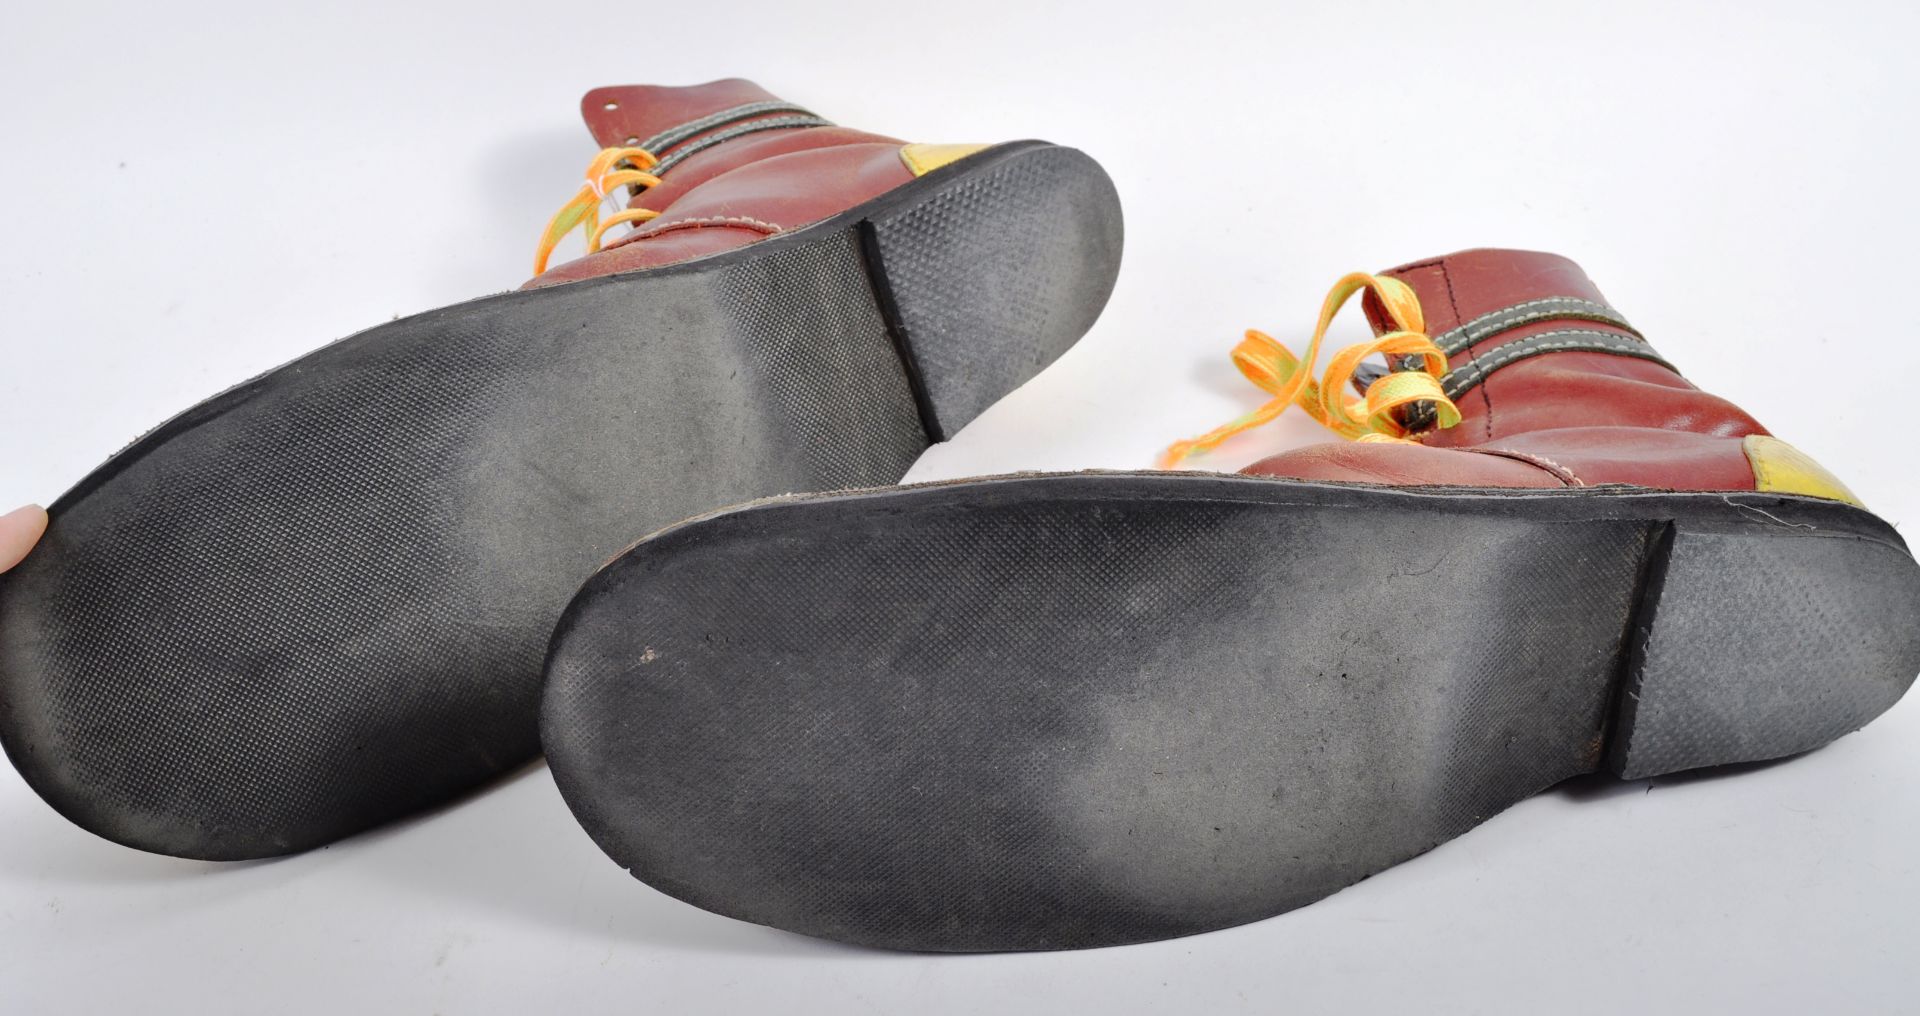 PAIR OF VINTAGE 20TH CENTURY OVERSIZED CLOWN SHOES - Image 4 of 5